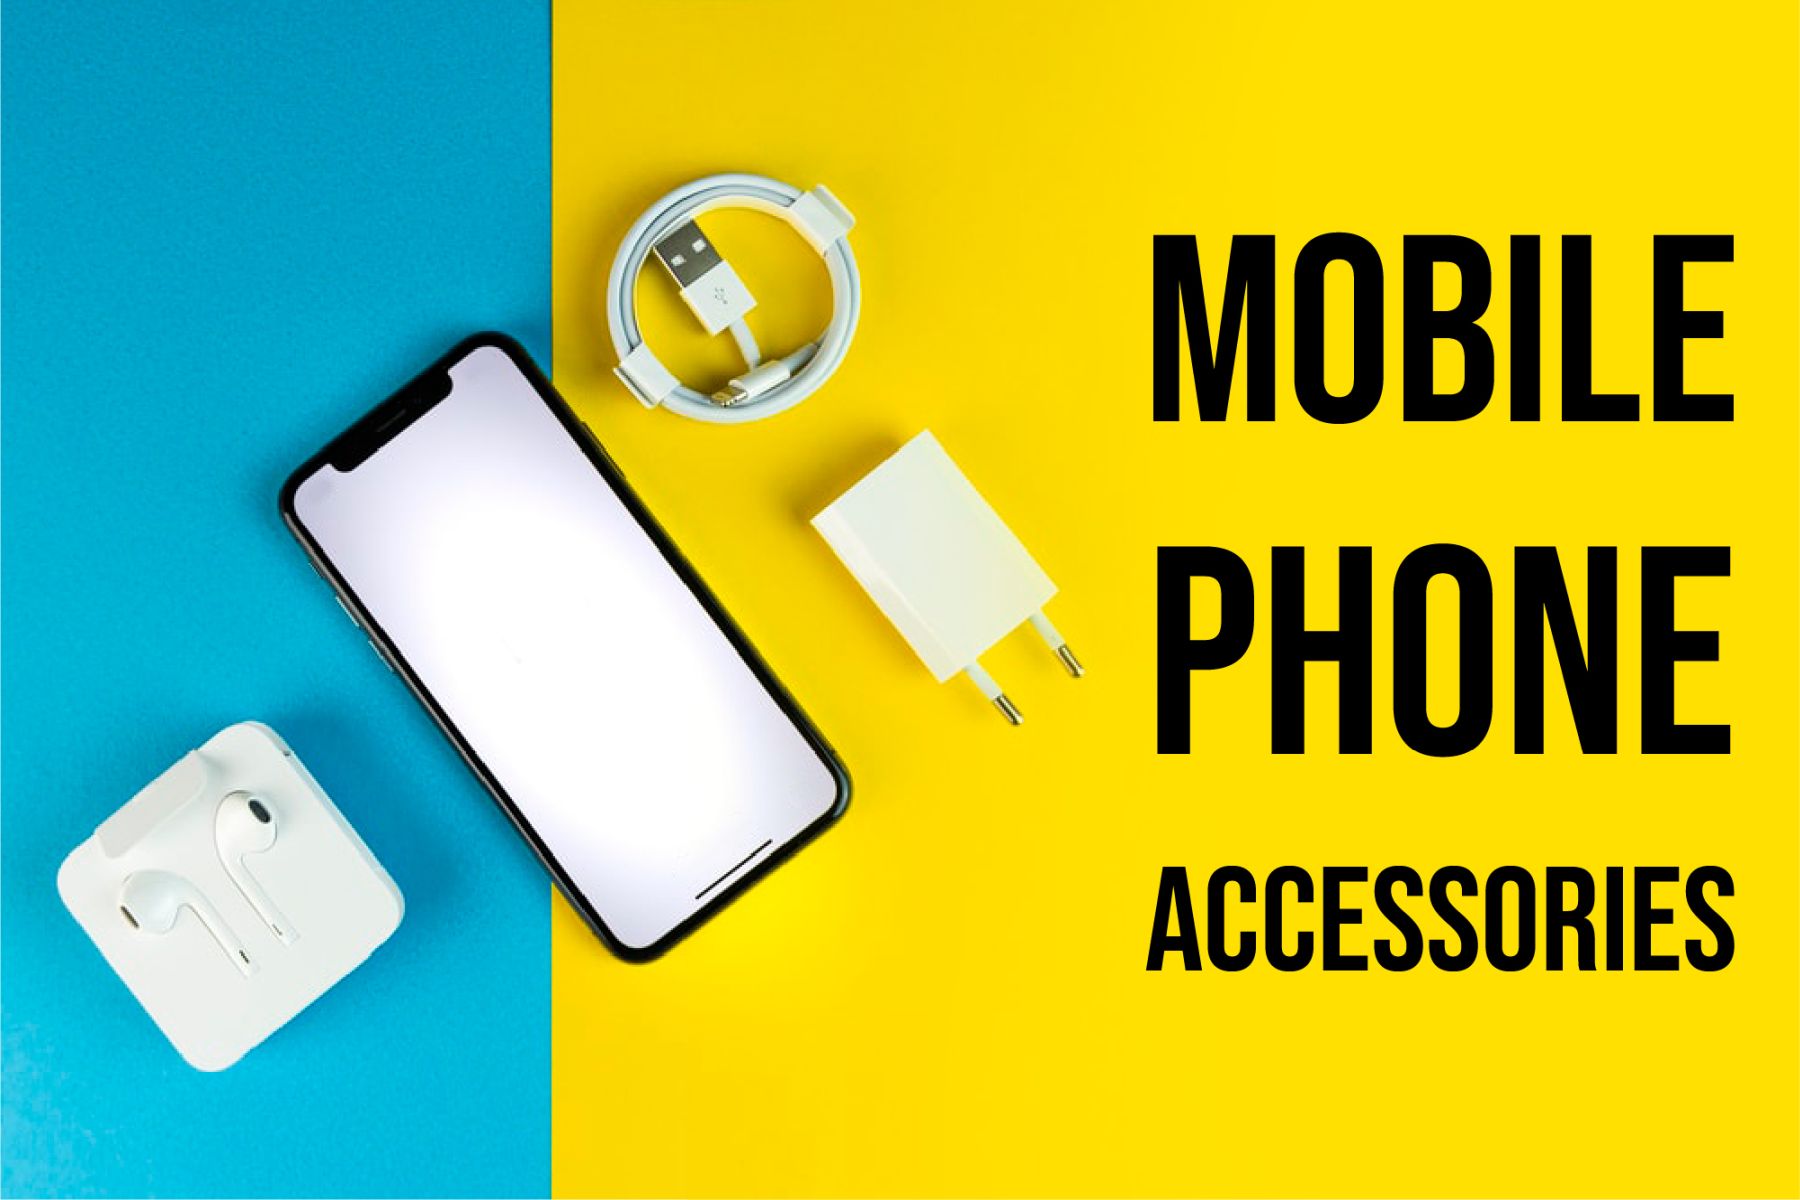 Mobile phone accessories are important tool to improve the appearance and  performance of the smartphone - Concept Phones